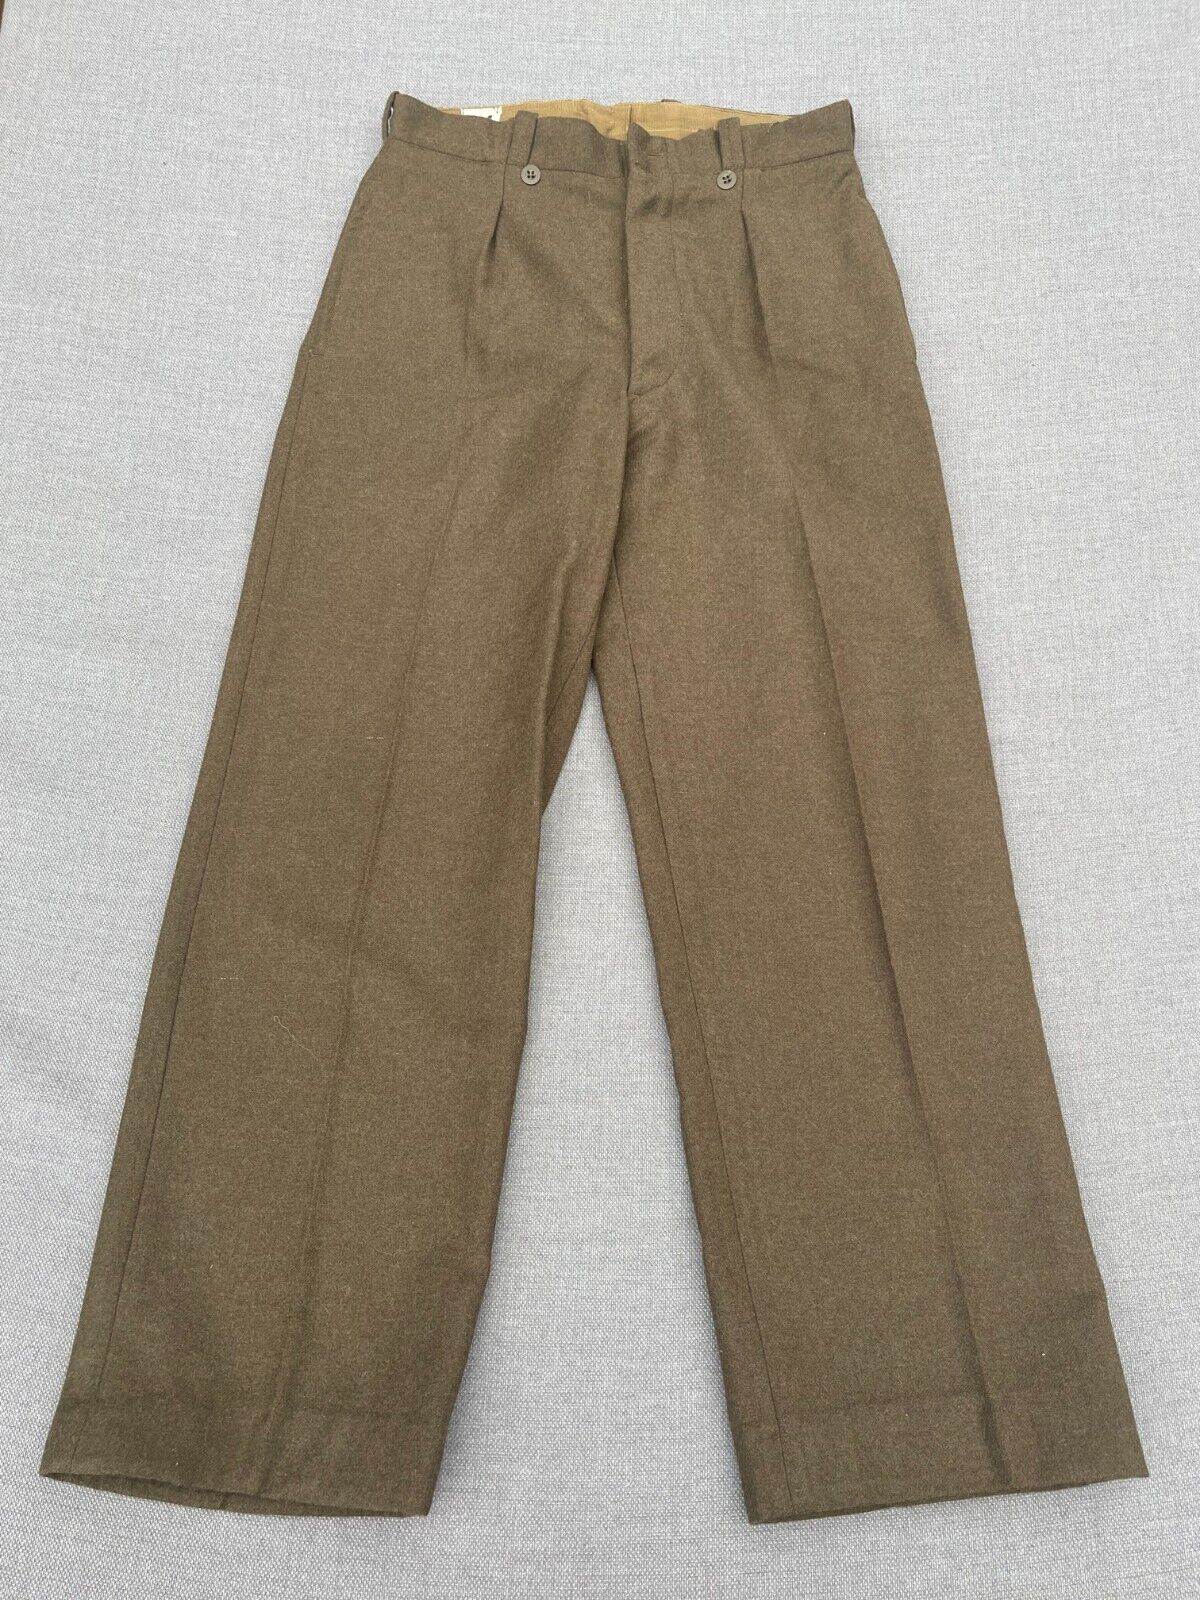 Vintage Mitin Antimite Definitif Trousers Mens 32x31 FRENCH Wool Combat FLAW